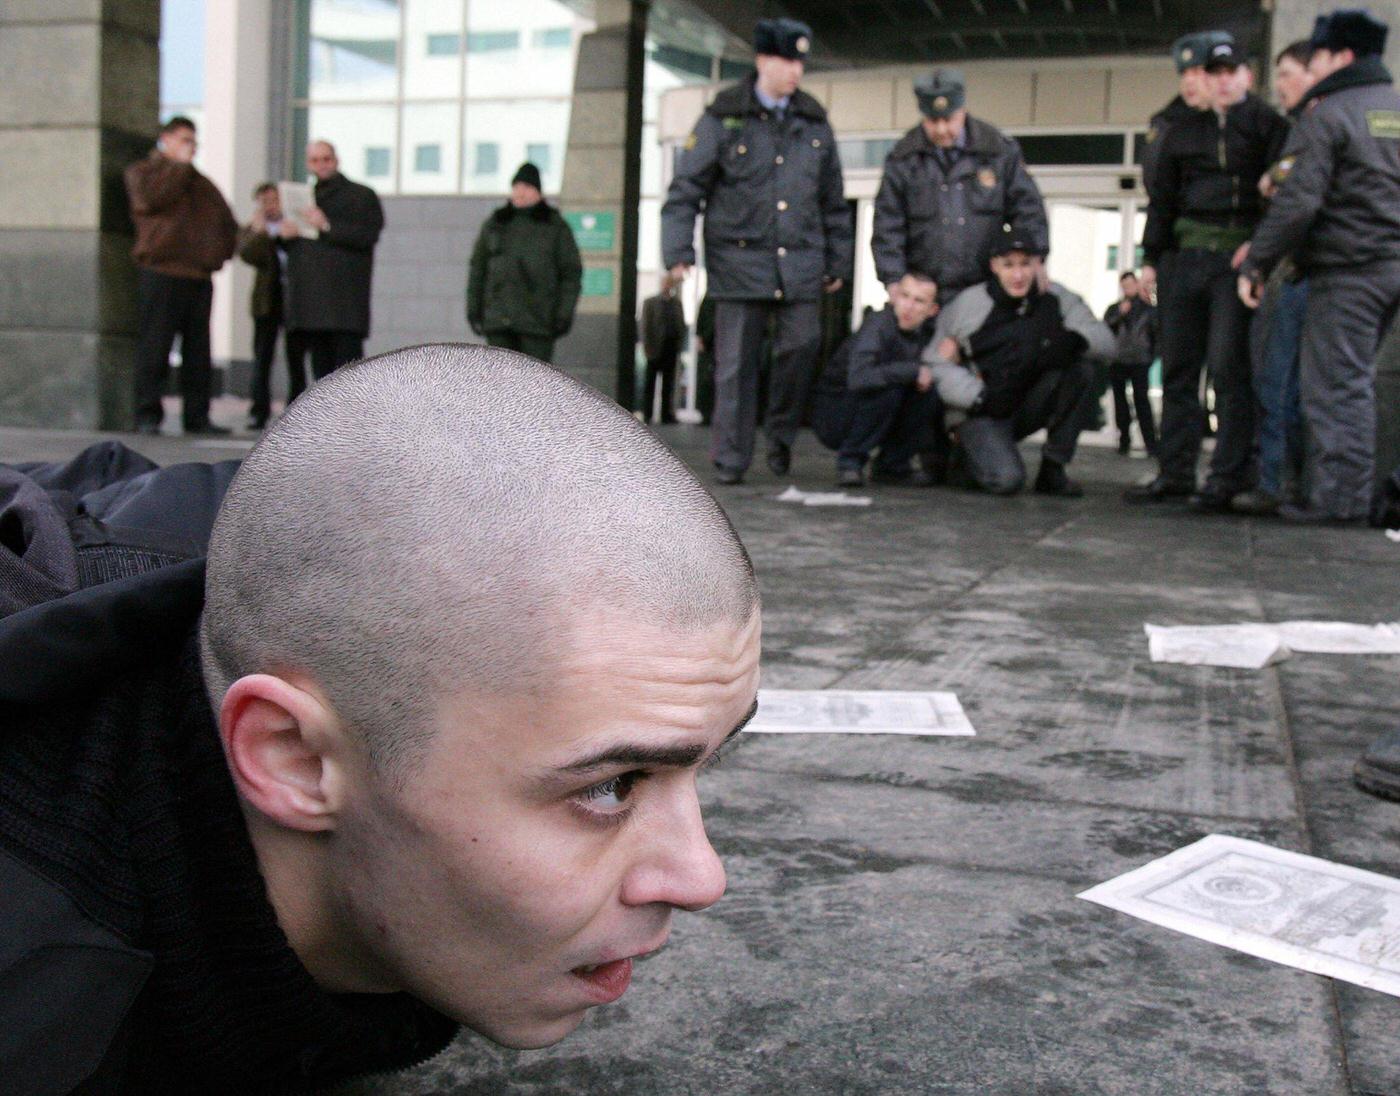 National-Bolshevik Party member lies on ground after being arrested by Russian police during protest outside "Sberbank" in Moscow demanding compensation for savings lost during Soviet collapse in 1991.